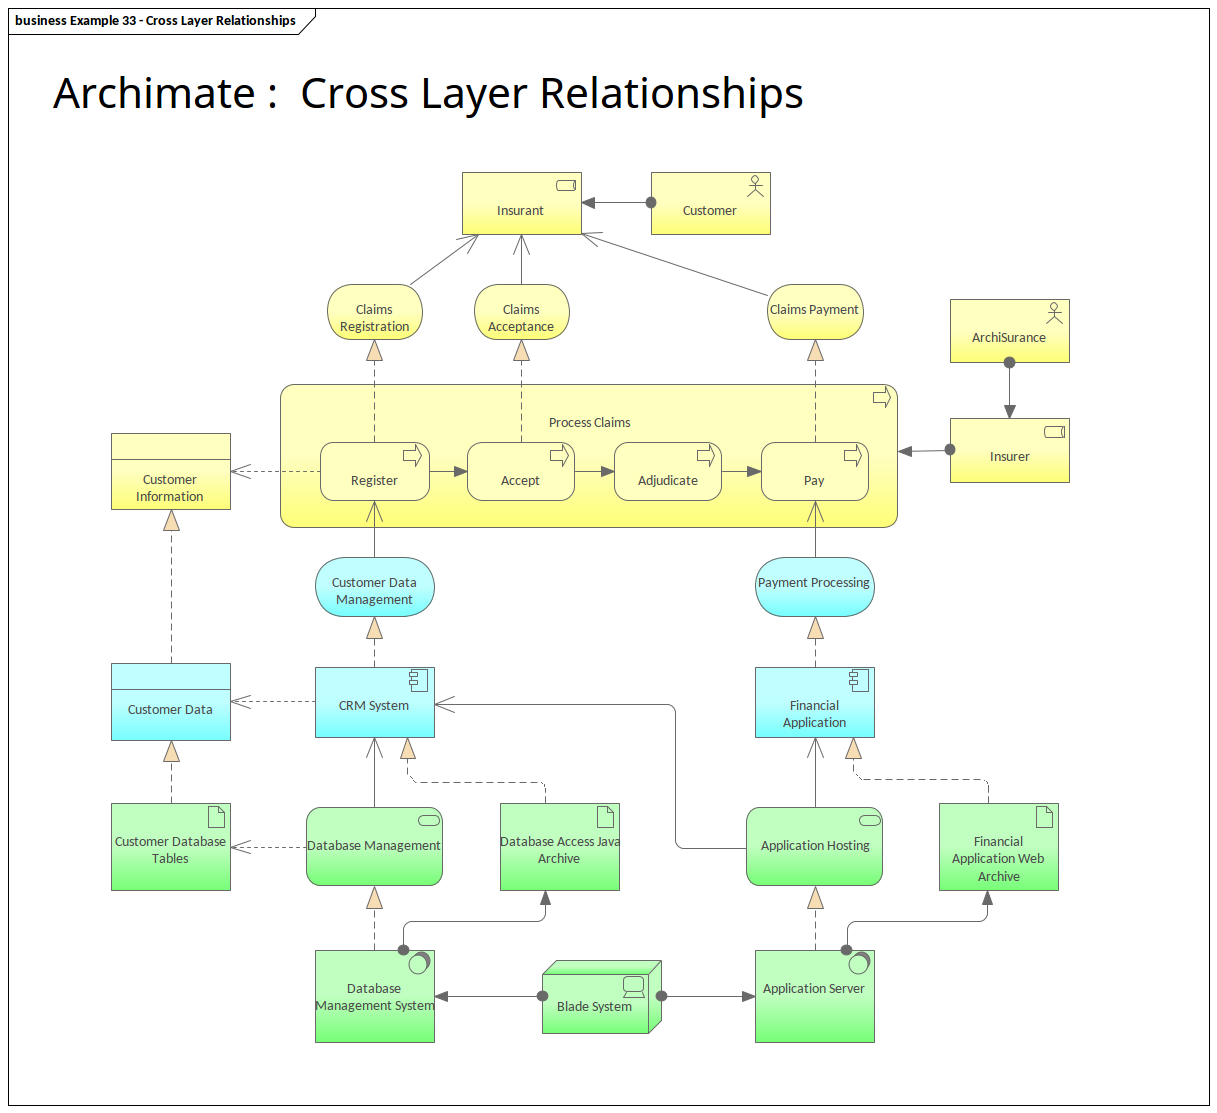 Archimate Diagram showing Cross Layer Relationships